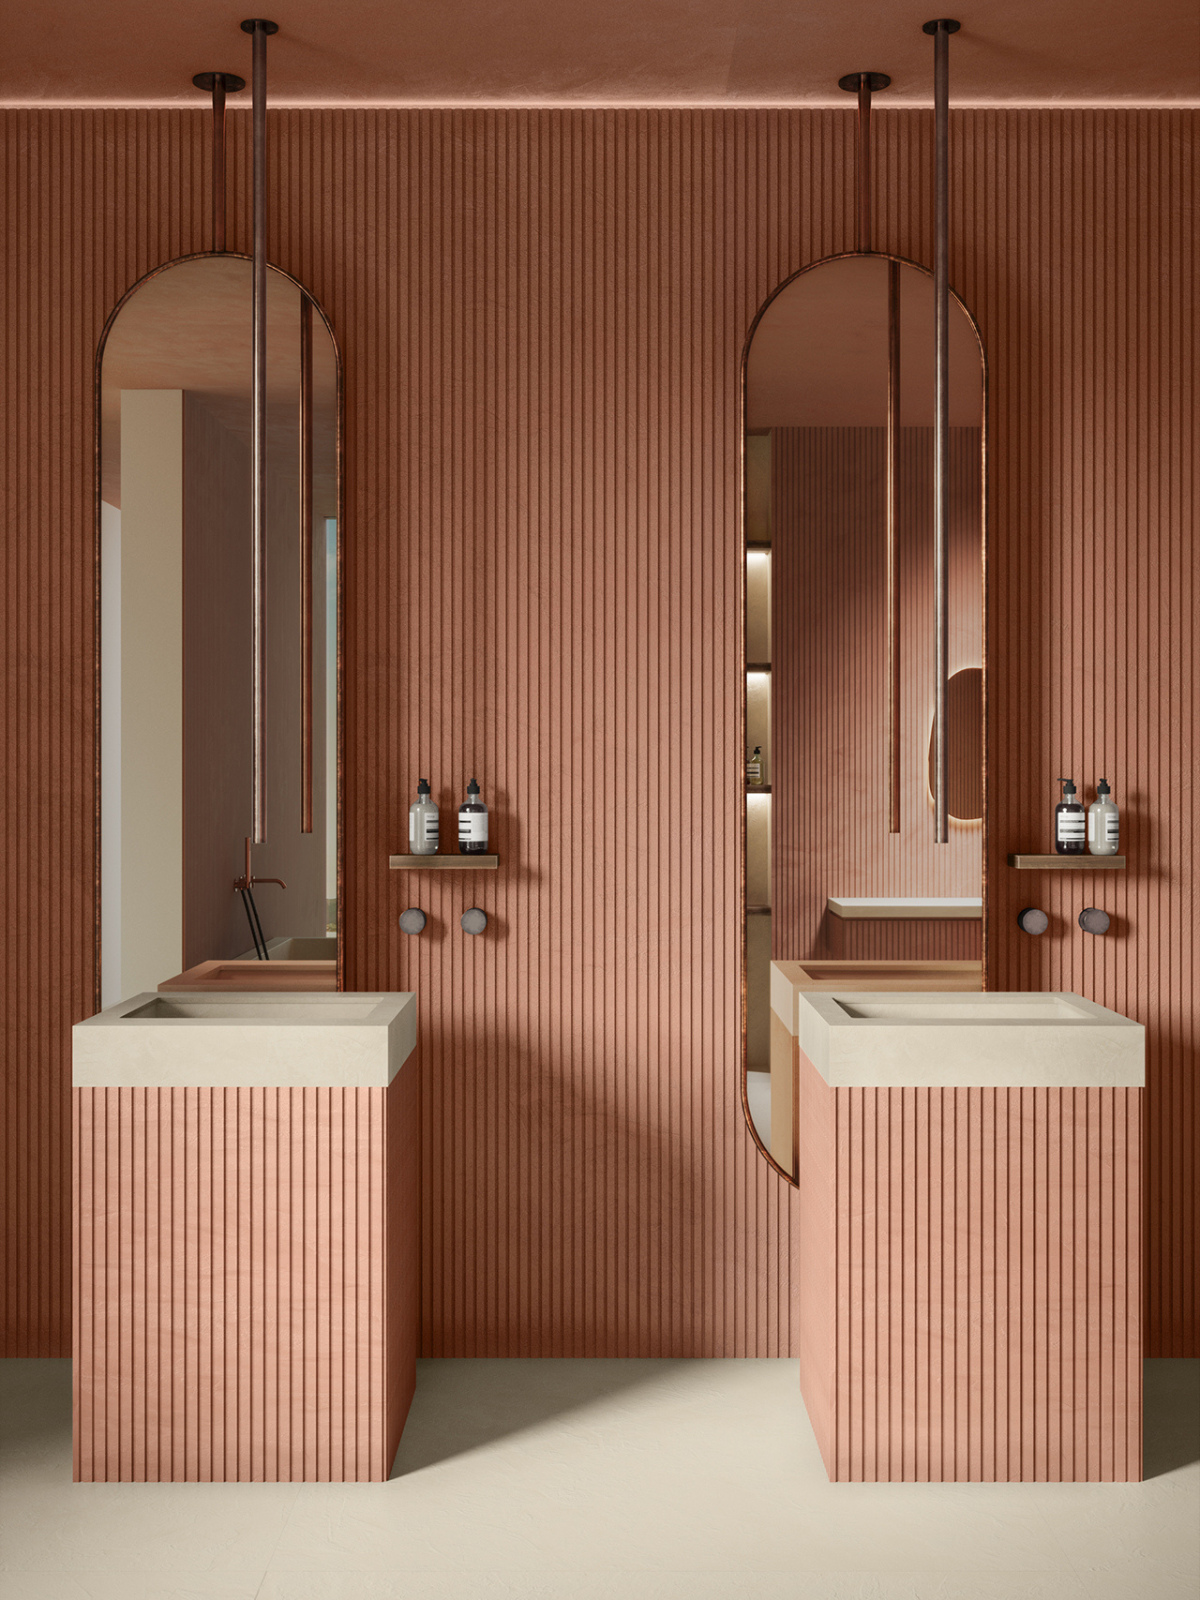 bathroom showing vertical tile patterns and two modern style vanity counters